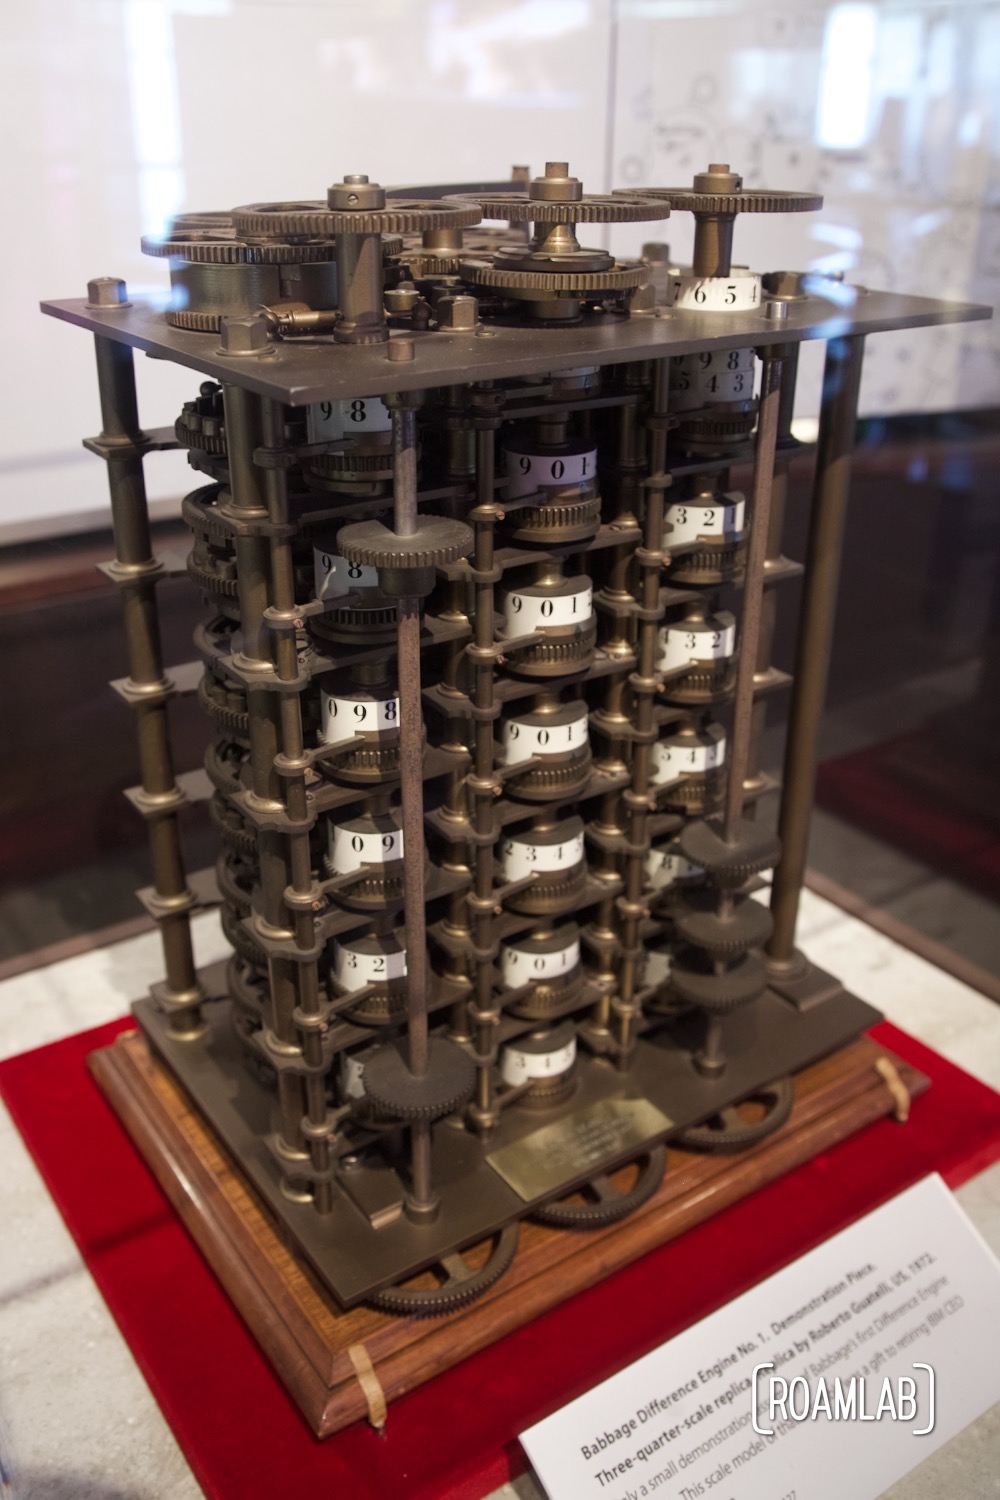 Close-up view of a Babbage Machine replica on display.